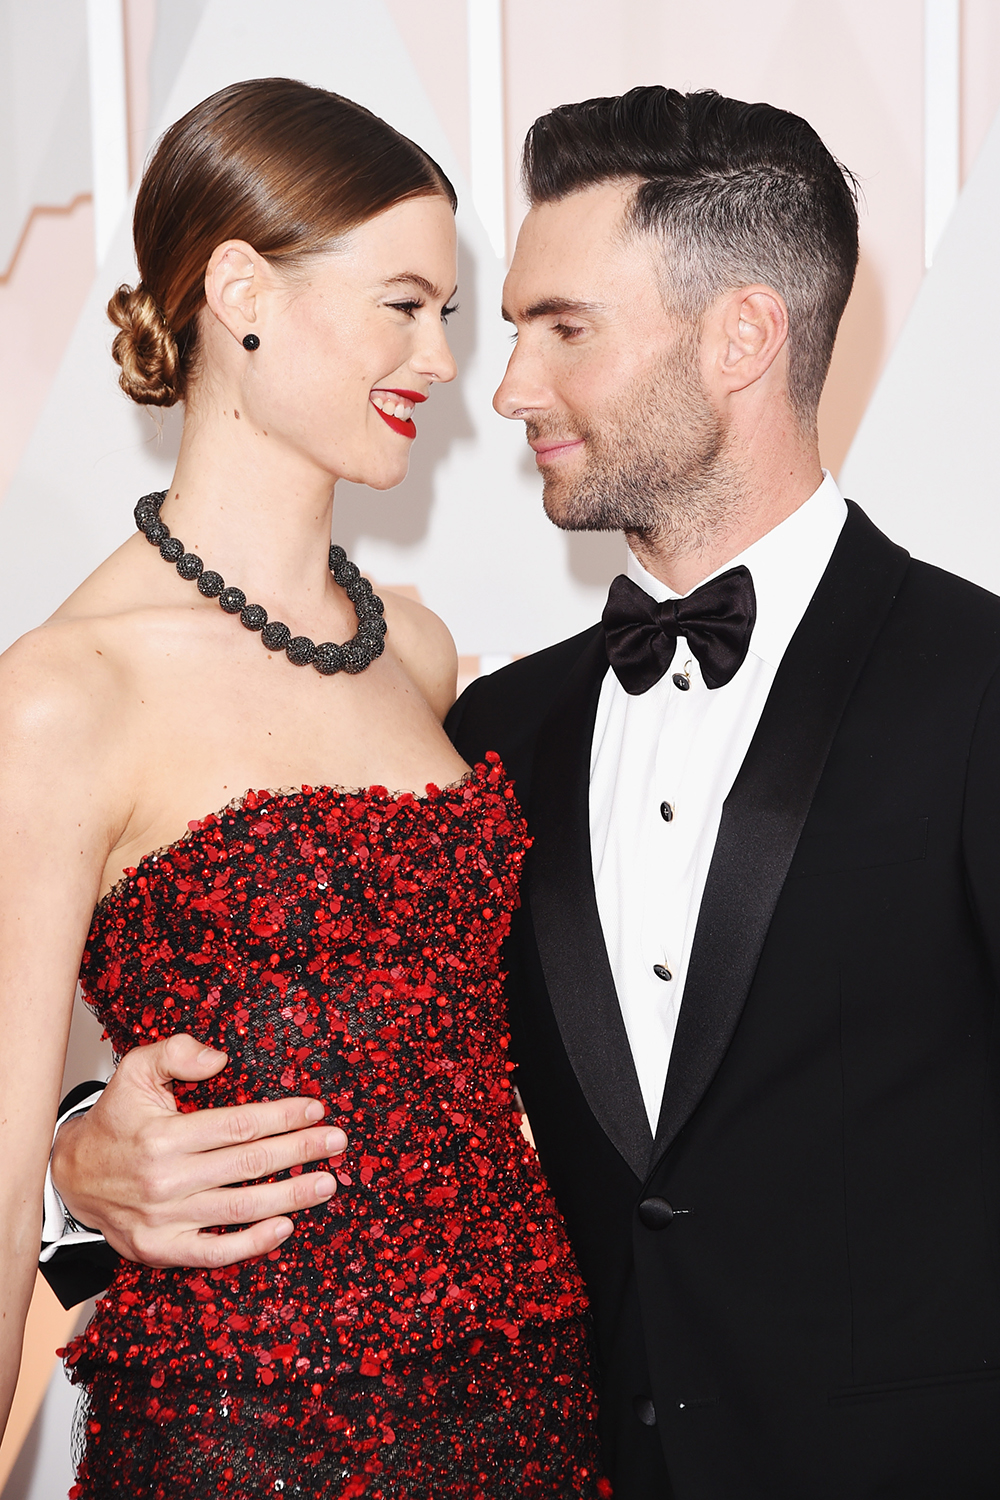 Adam Levine was a notorious Victoria's Secret modelizer, before he settled down and married VS Angel Behati Prinsloo in 2014.